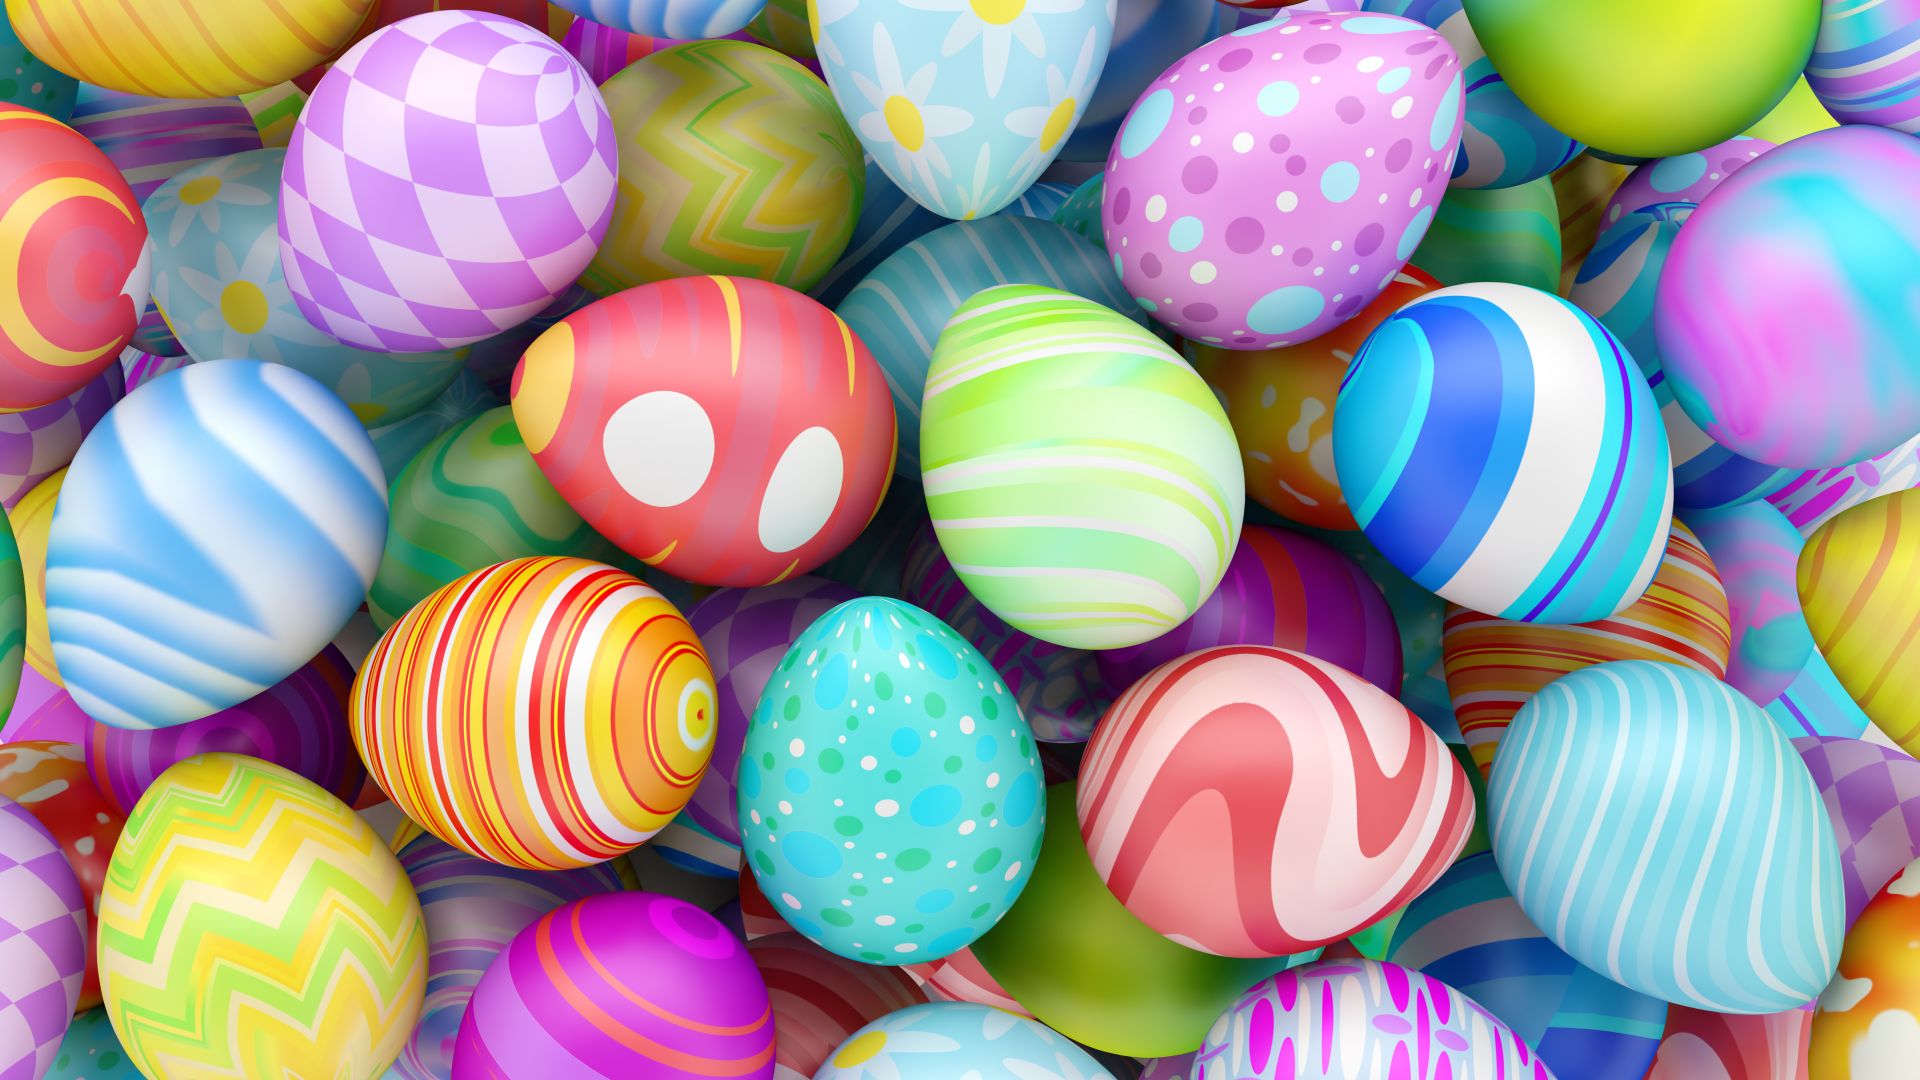 Desktop Wallpaper Easter Eggs, Easter, Colorful, Abstract, HD Image, Picture, Background, A896a9